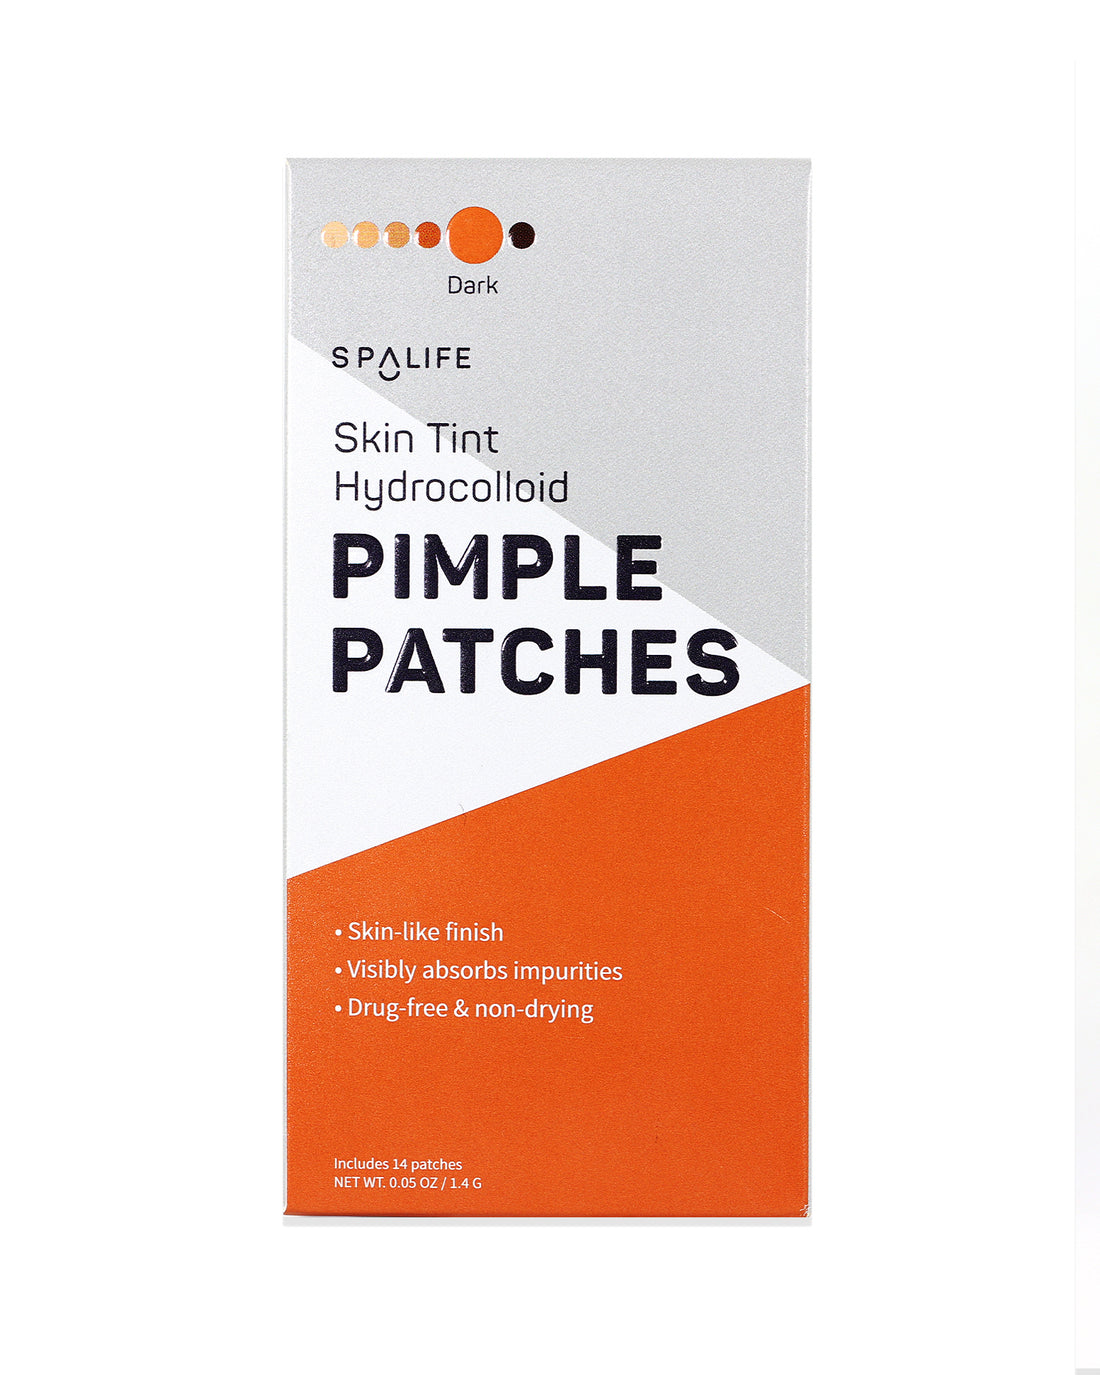 Skin_tint_pimple_patches_packe-428